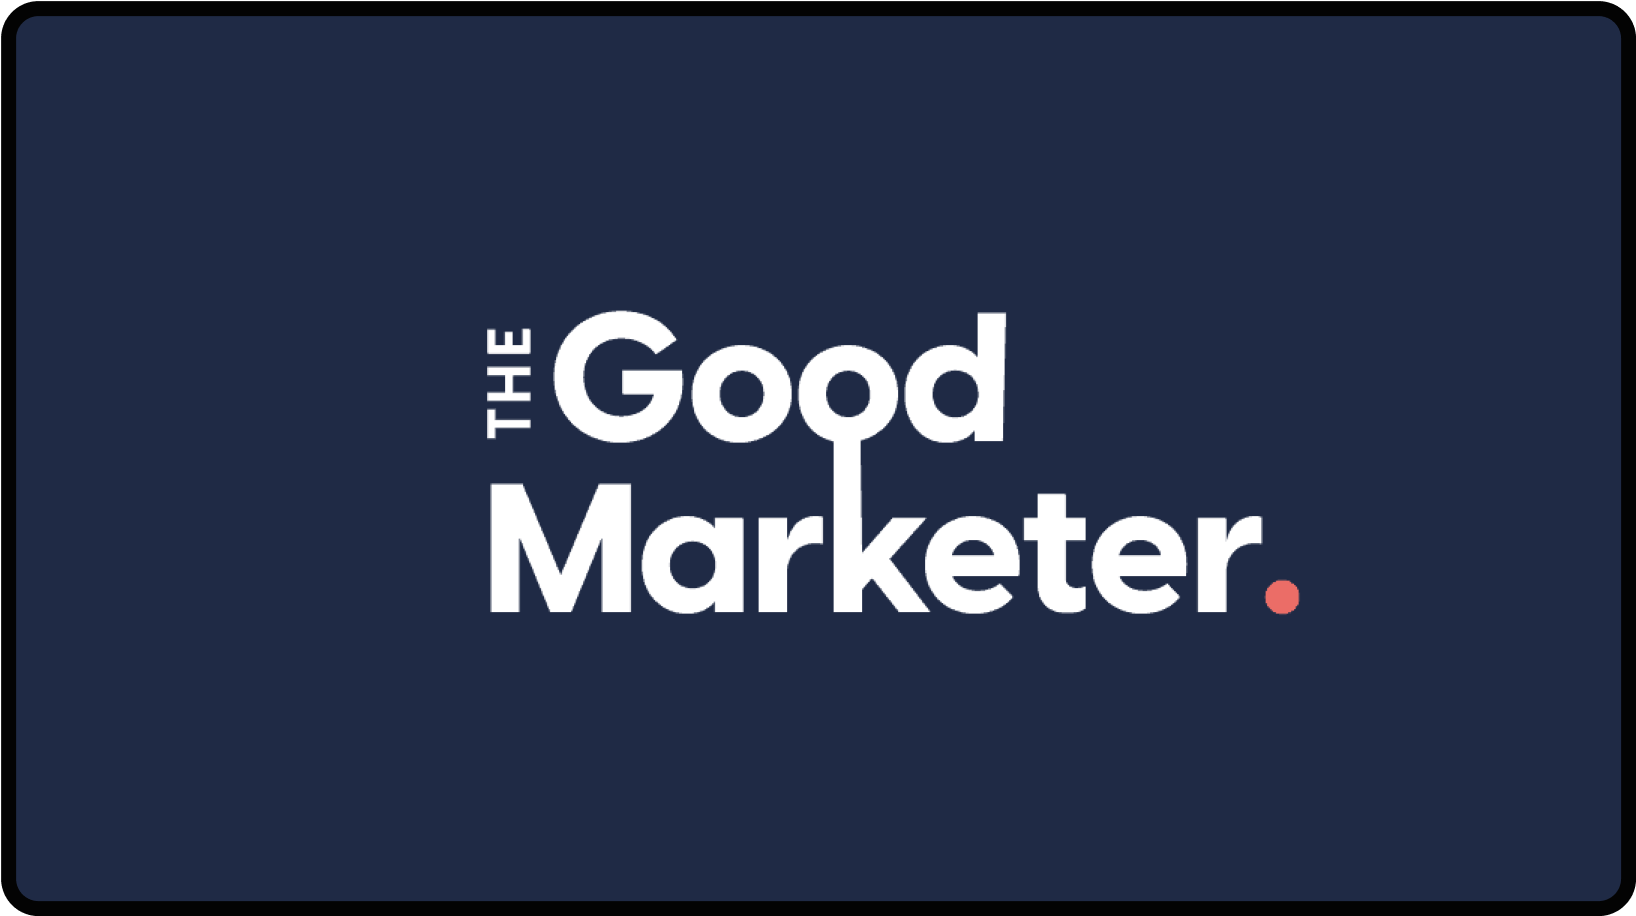 The good marketer: Startup marketing agency for startup in London (UK)